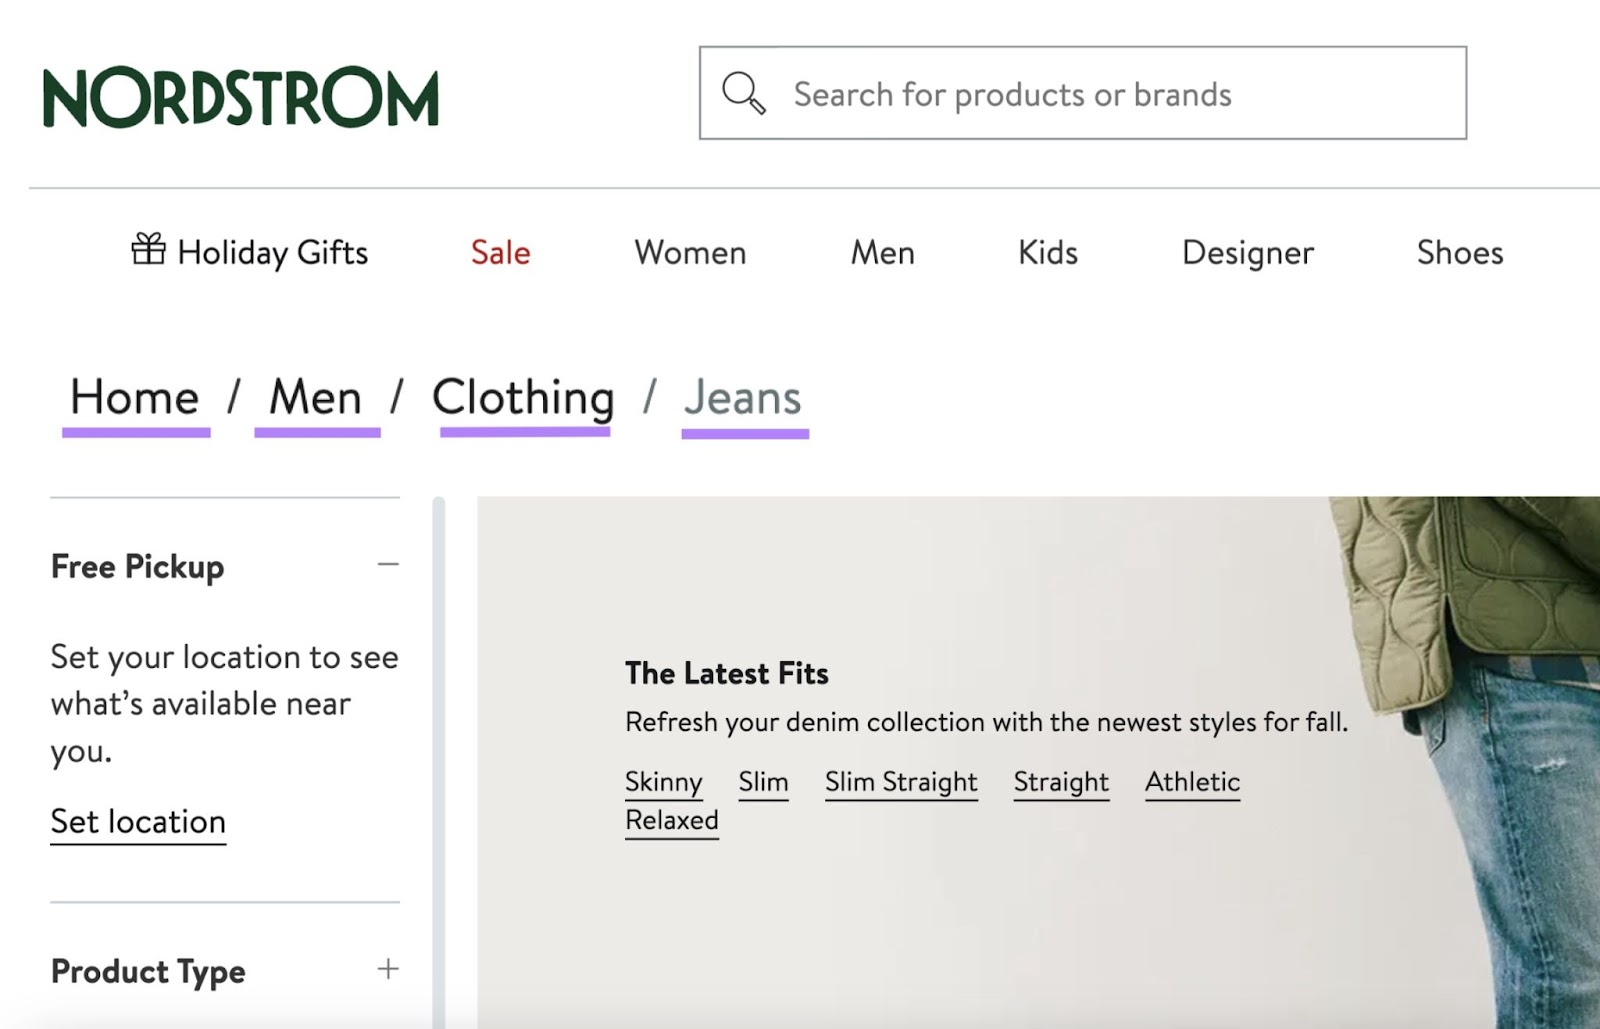 "Home," "Men," "Clothing," "and Jeans" links highlighted on the Nordstrom's page